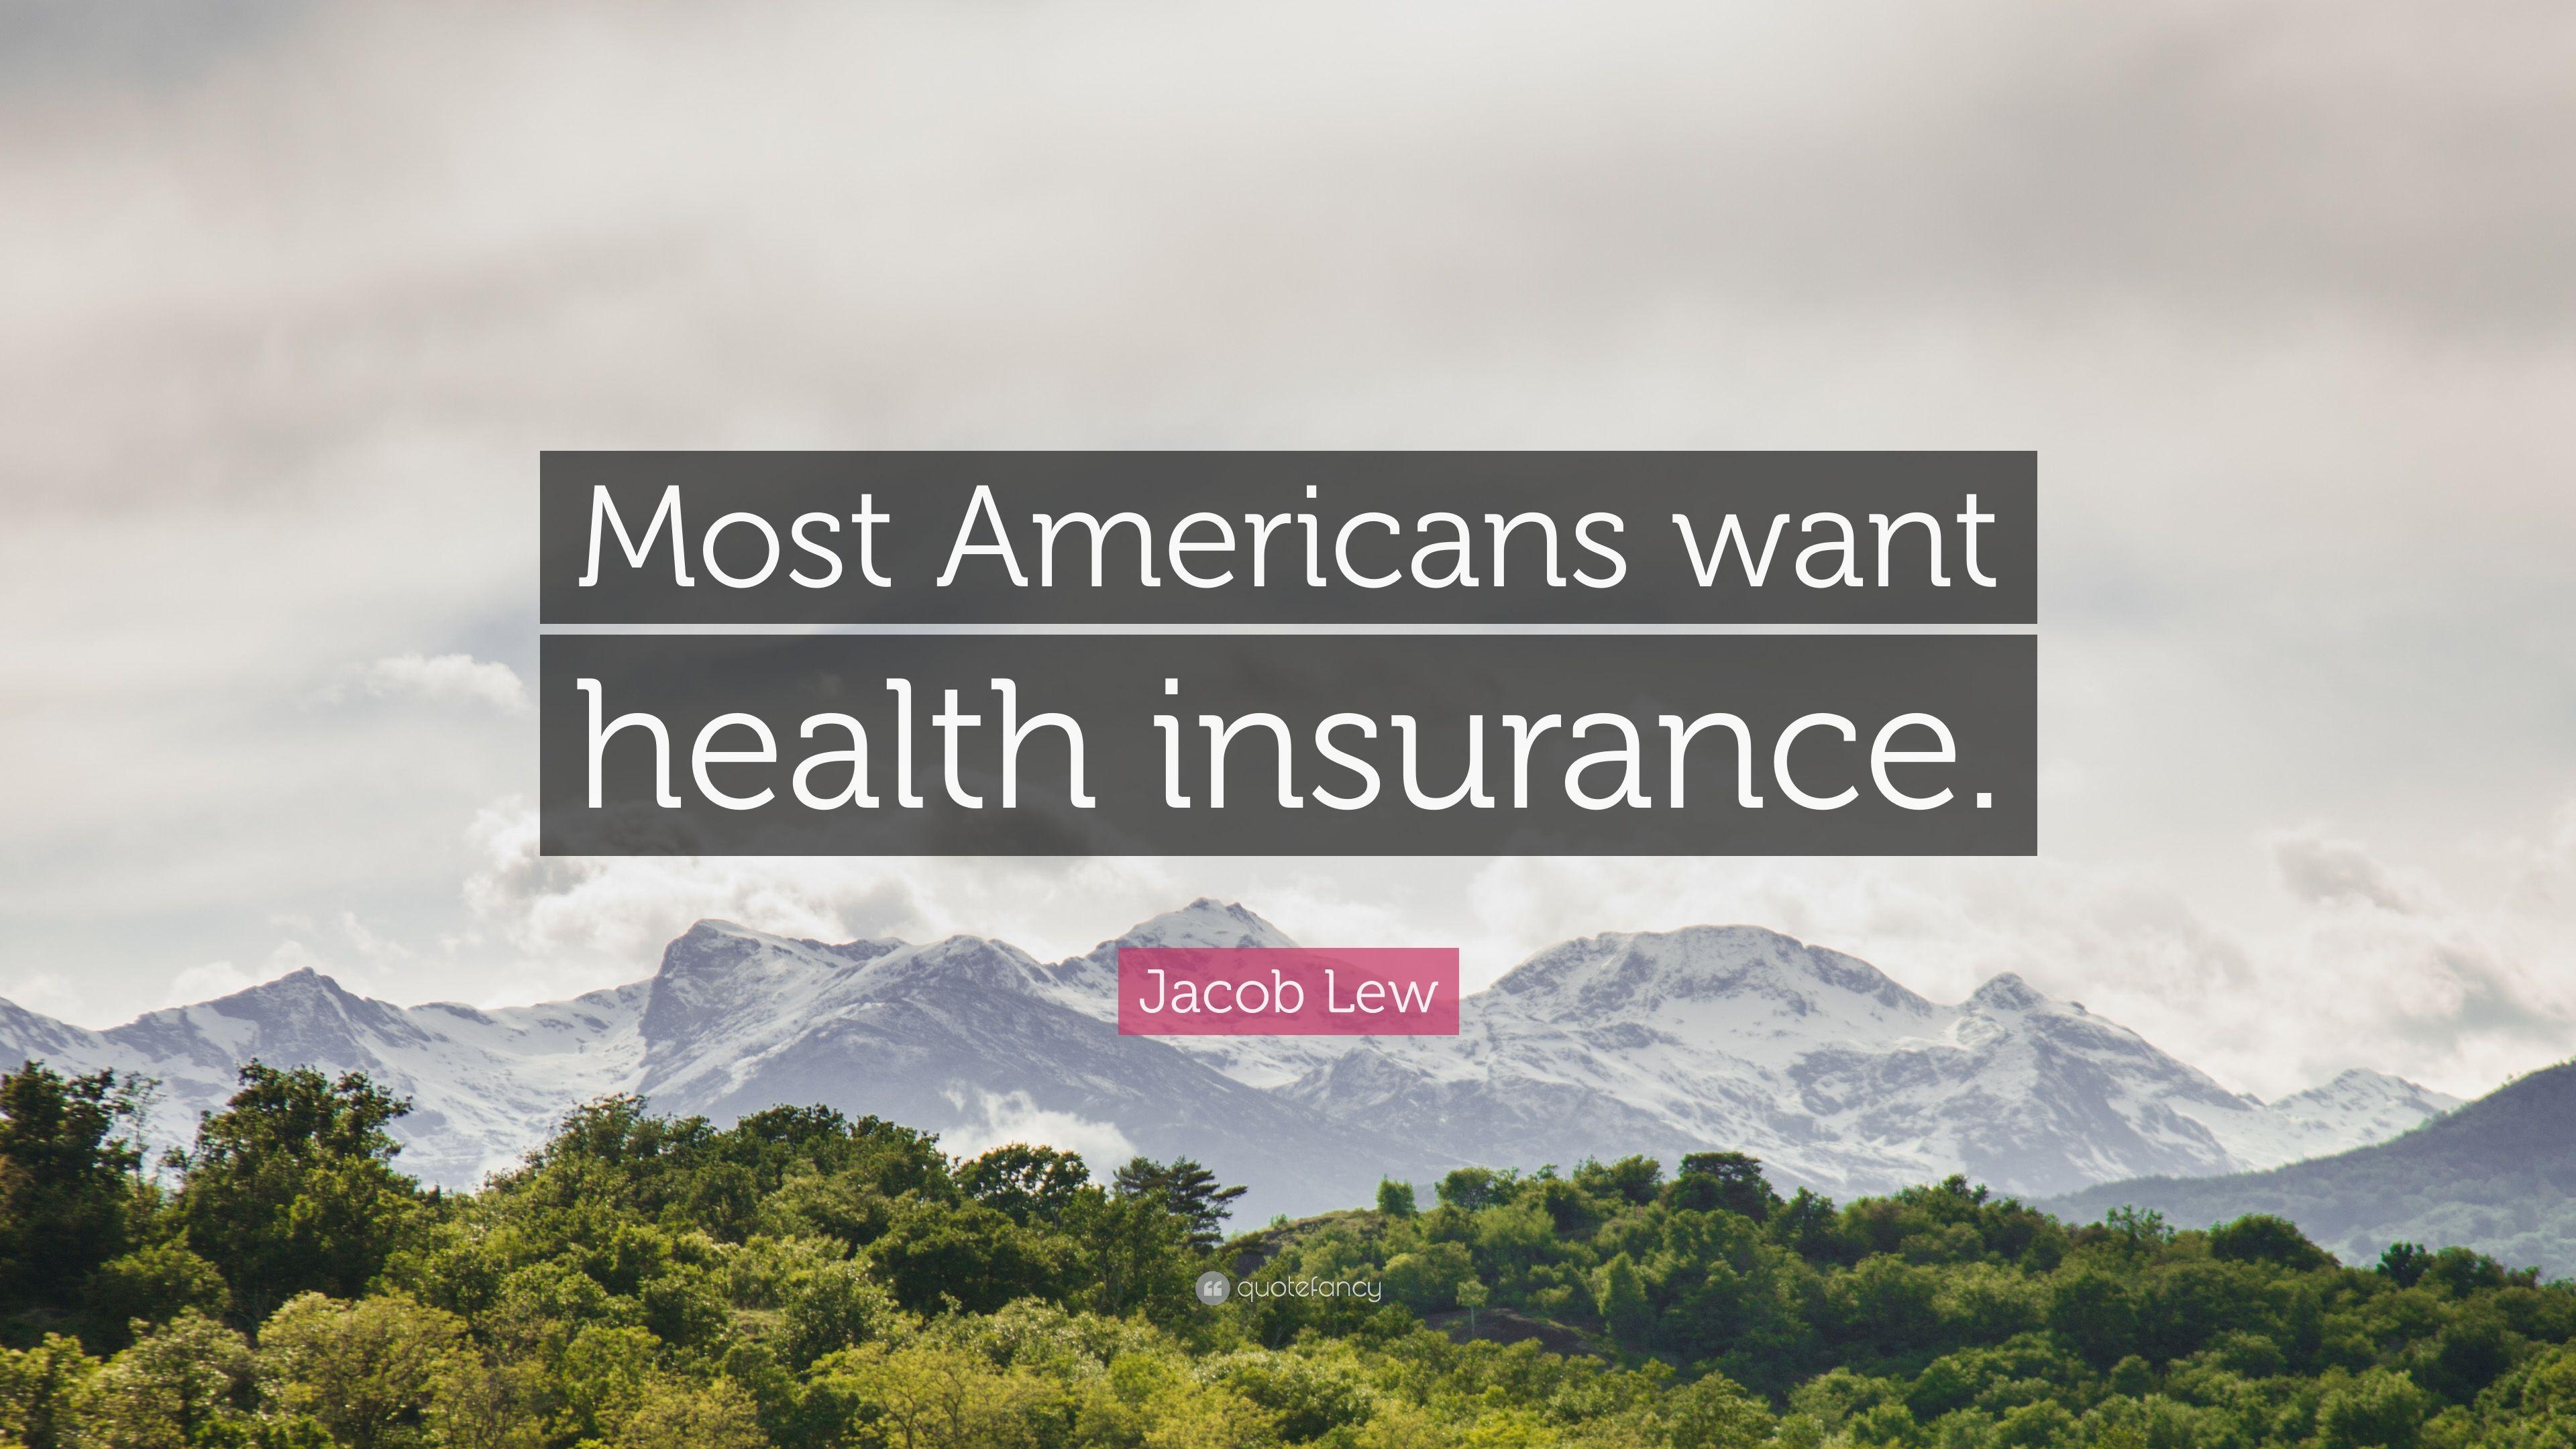 Jacob Lew Quote: “Most Americans want health insurance.” 7